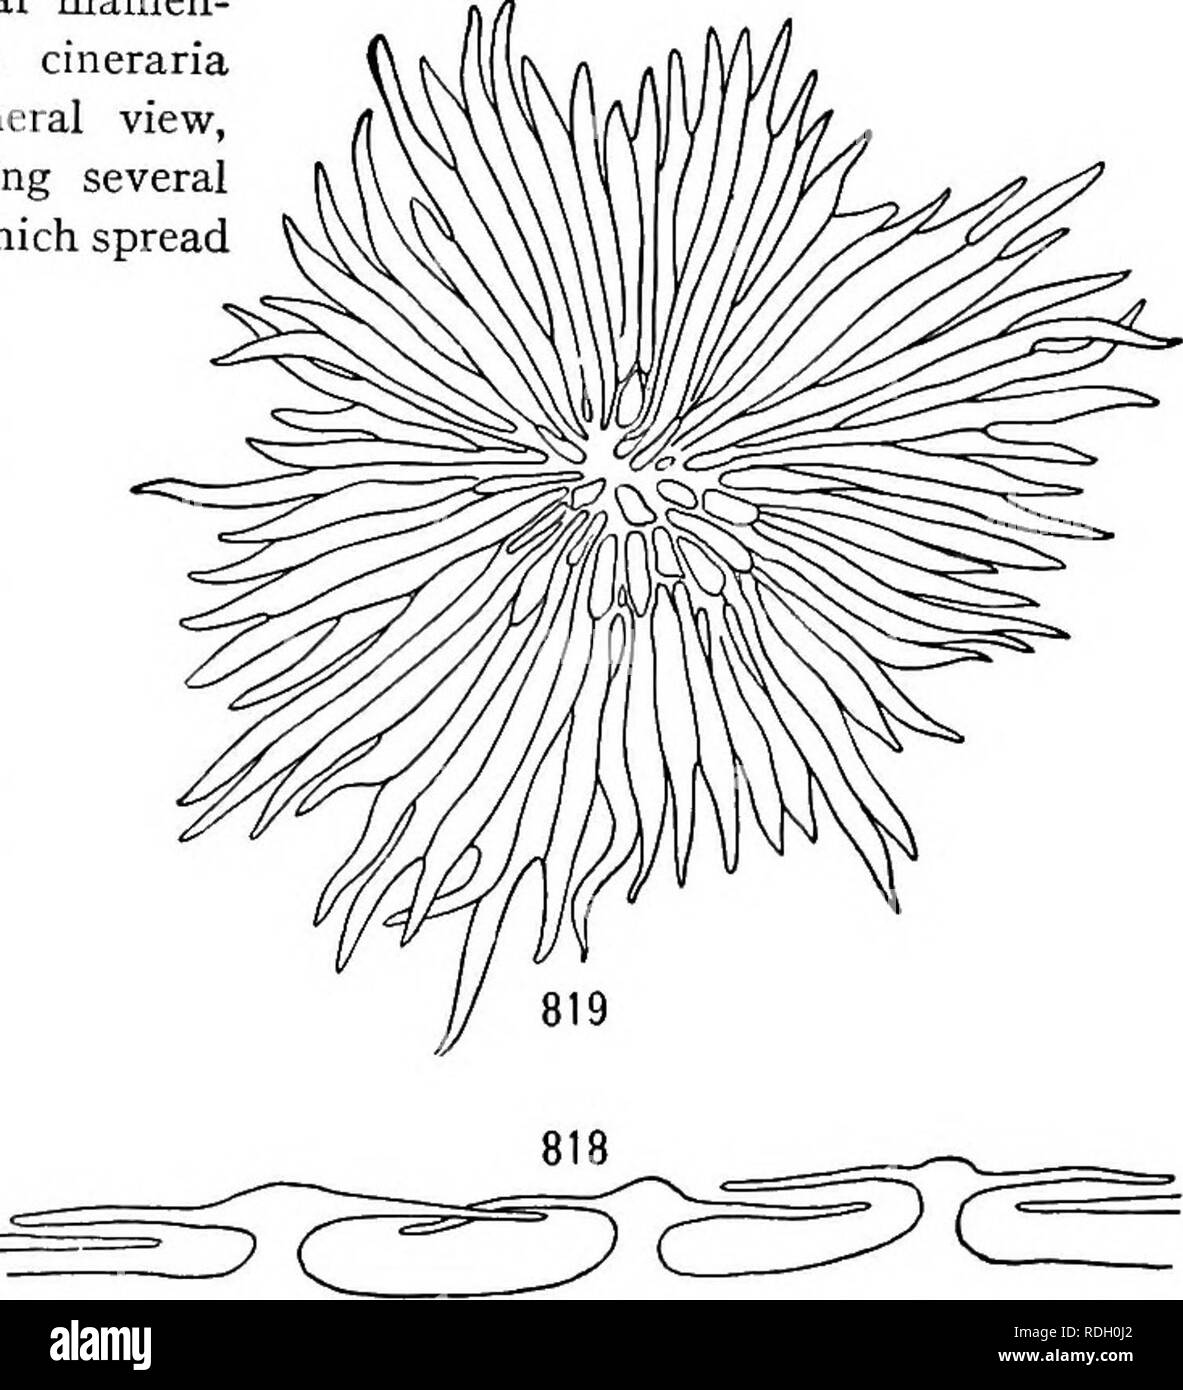 . A textbook of botany for colleges and universities ... Botany. Figs. 8i6, 817. —Multicellular filamen- tous hairs from a leaf of the cineraria (Senecio cruentus): 816, a general view, as seen in cross section, showing several hairs with their whip-like ends, which spread out horizontally, forming cham- bers between the basal portions of the hairs; note the great length of the hairs in proportion to the leaf diameter; considerably mag- nified; 817, a single hair; highly magnified. ings,Ledum,etc.). Leaves frequently are hairier when young than when mature, many of the hairs soon breaking at a Stock Photo